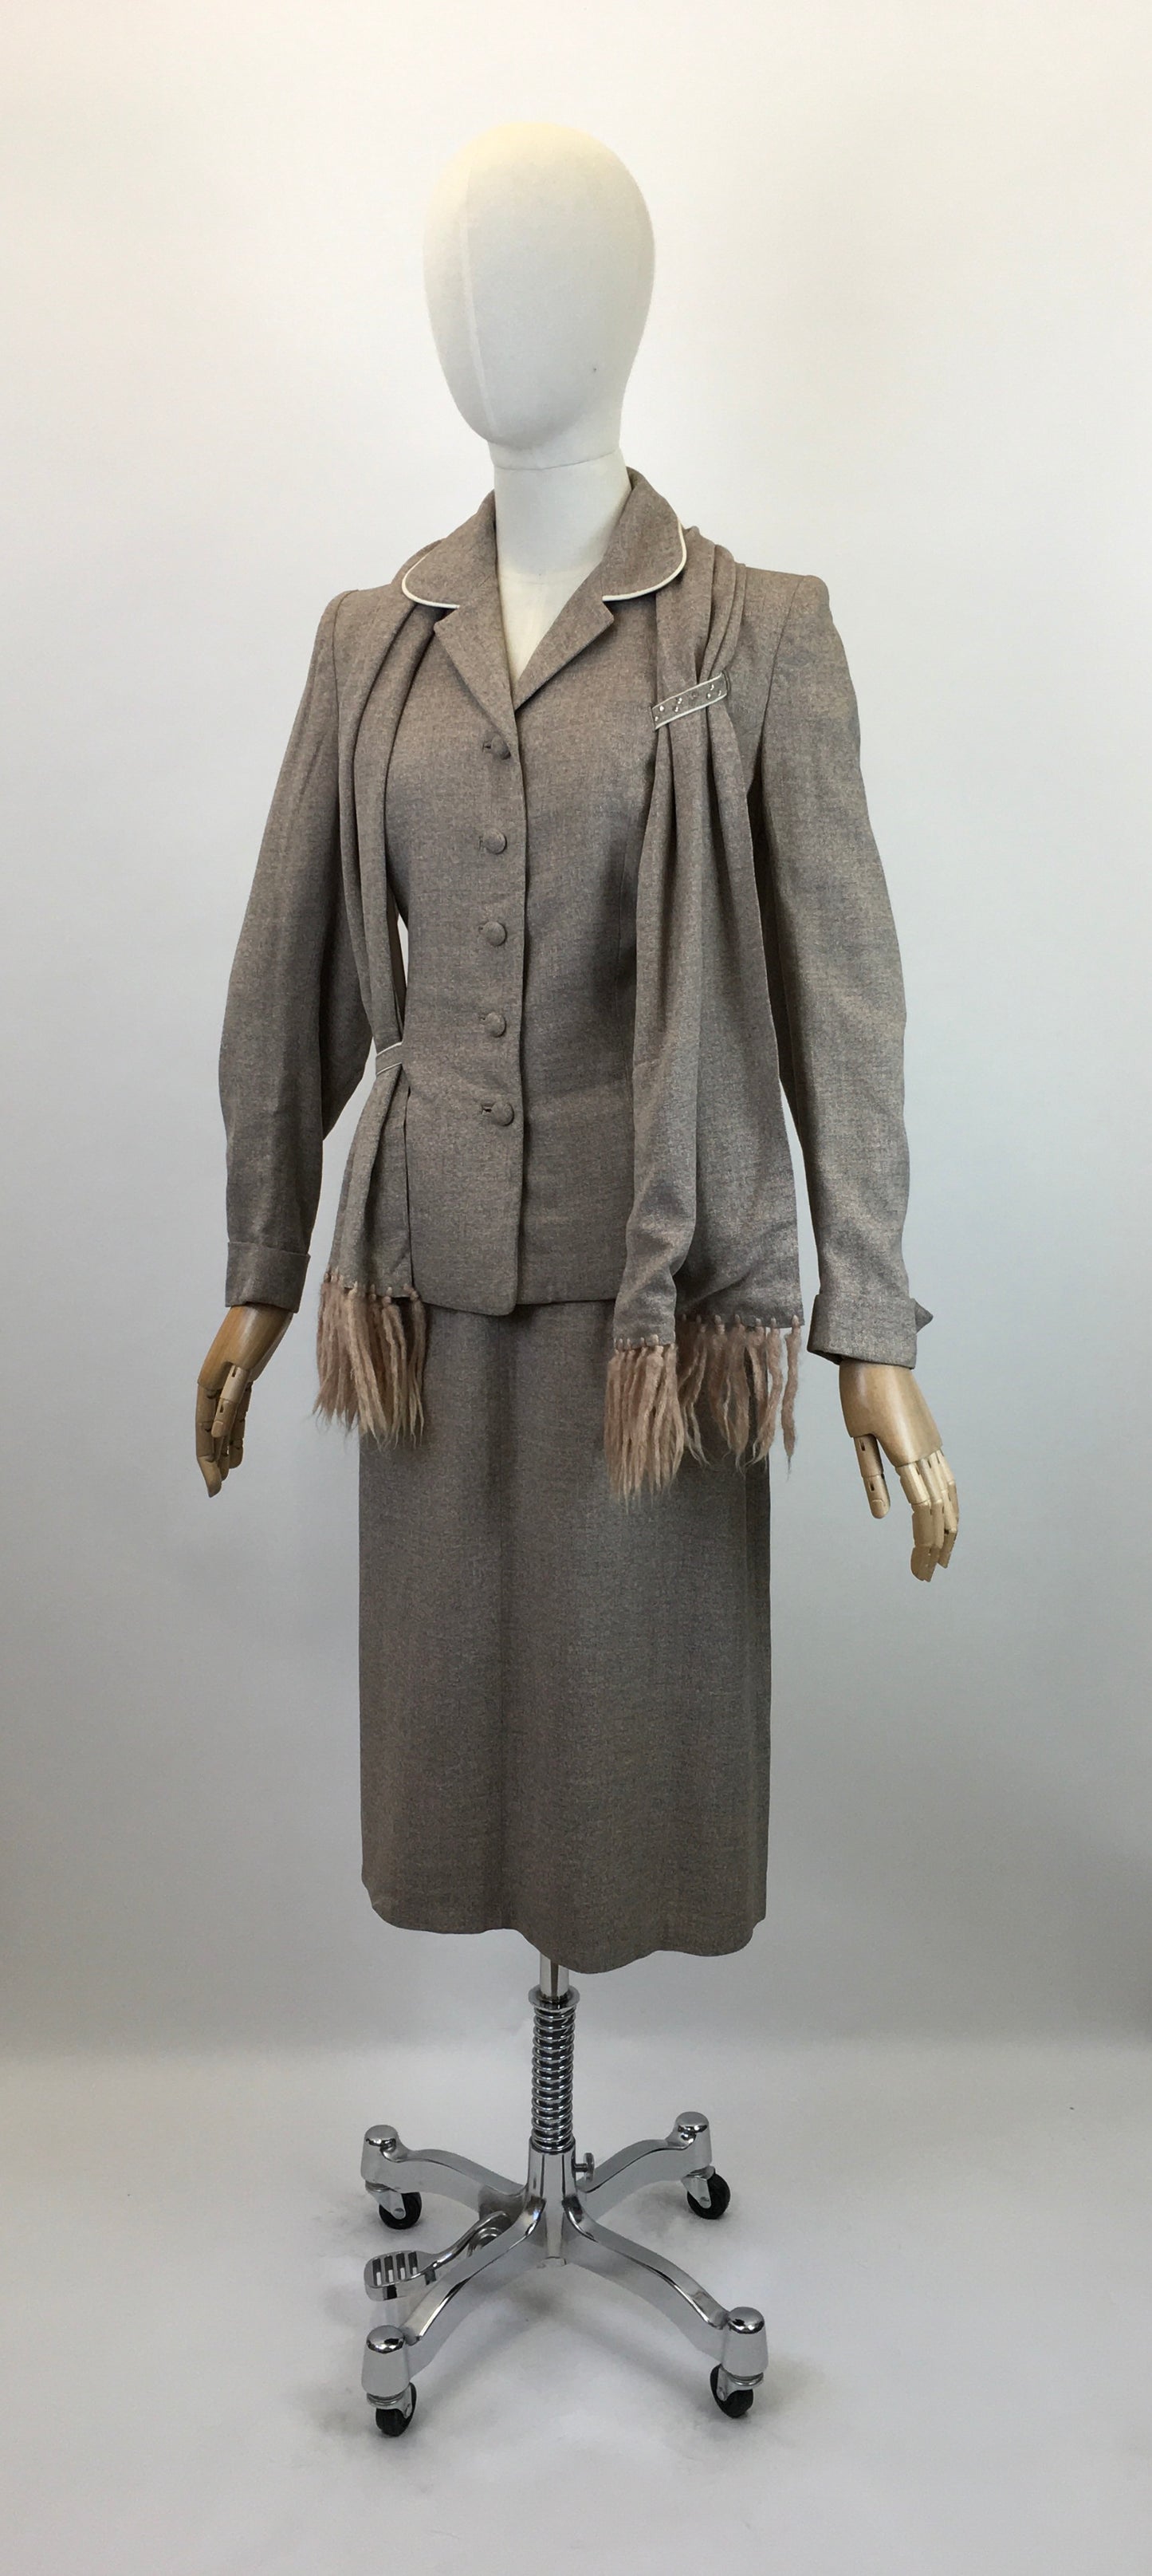 Original 1940's STUNNING 3pc Suit - In Soft Fawn with A Draped Tasselled Scarf